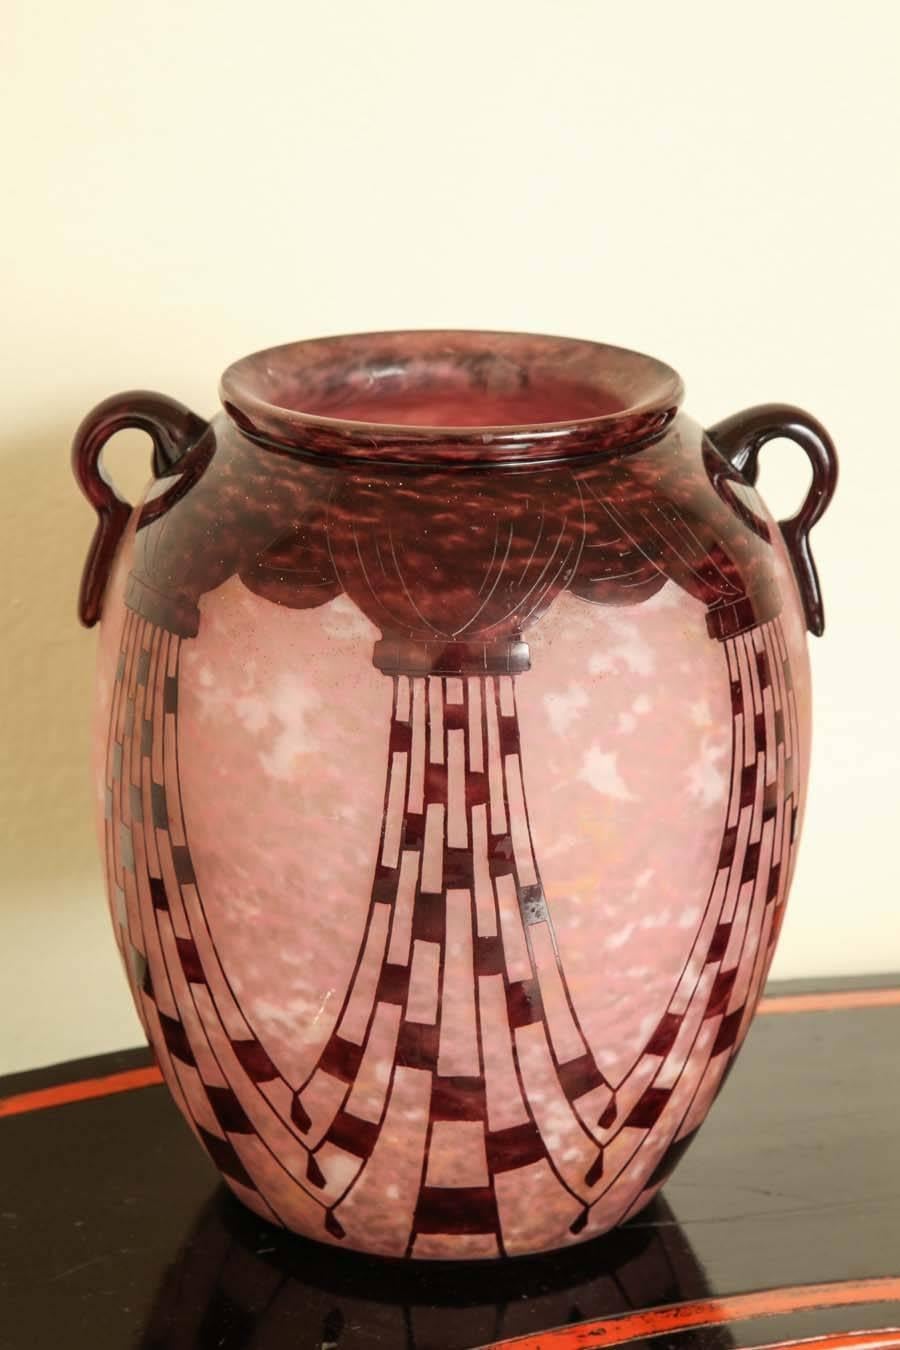 Designed by Charles Schneider, France, circa 1928.
With etched necklace (collier) in deep maroon cameo on a mottled pink and white ground. Signed 